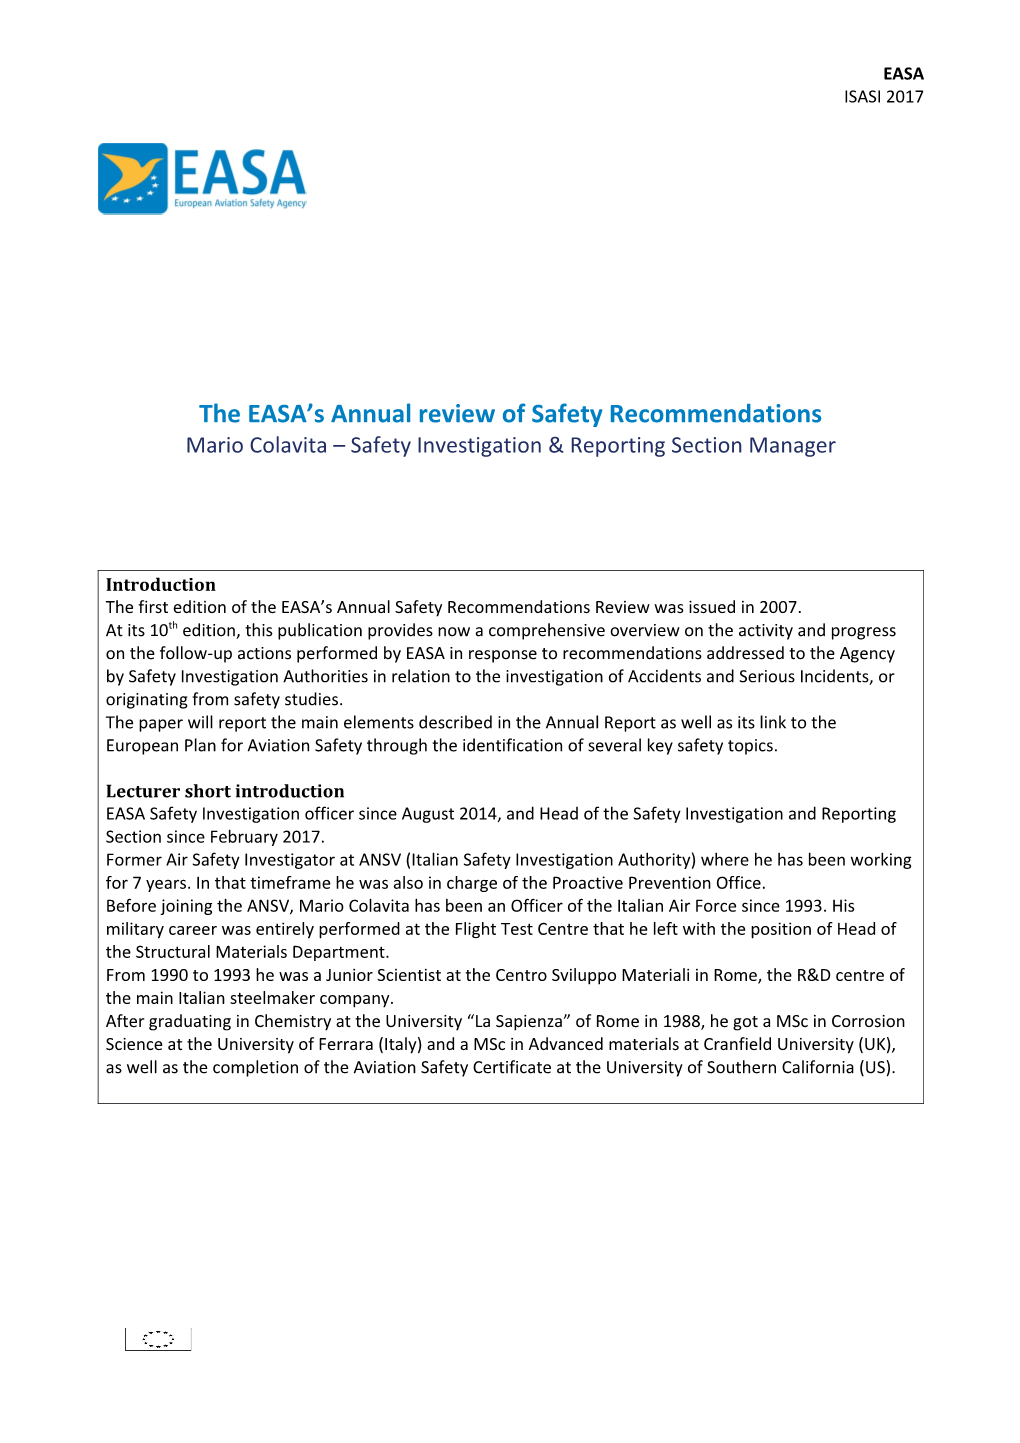 The EASA S Annual Review of Safety Recommendations